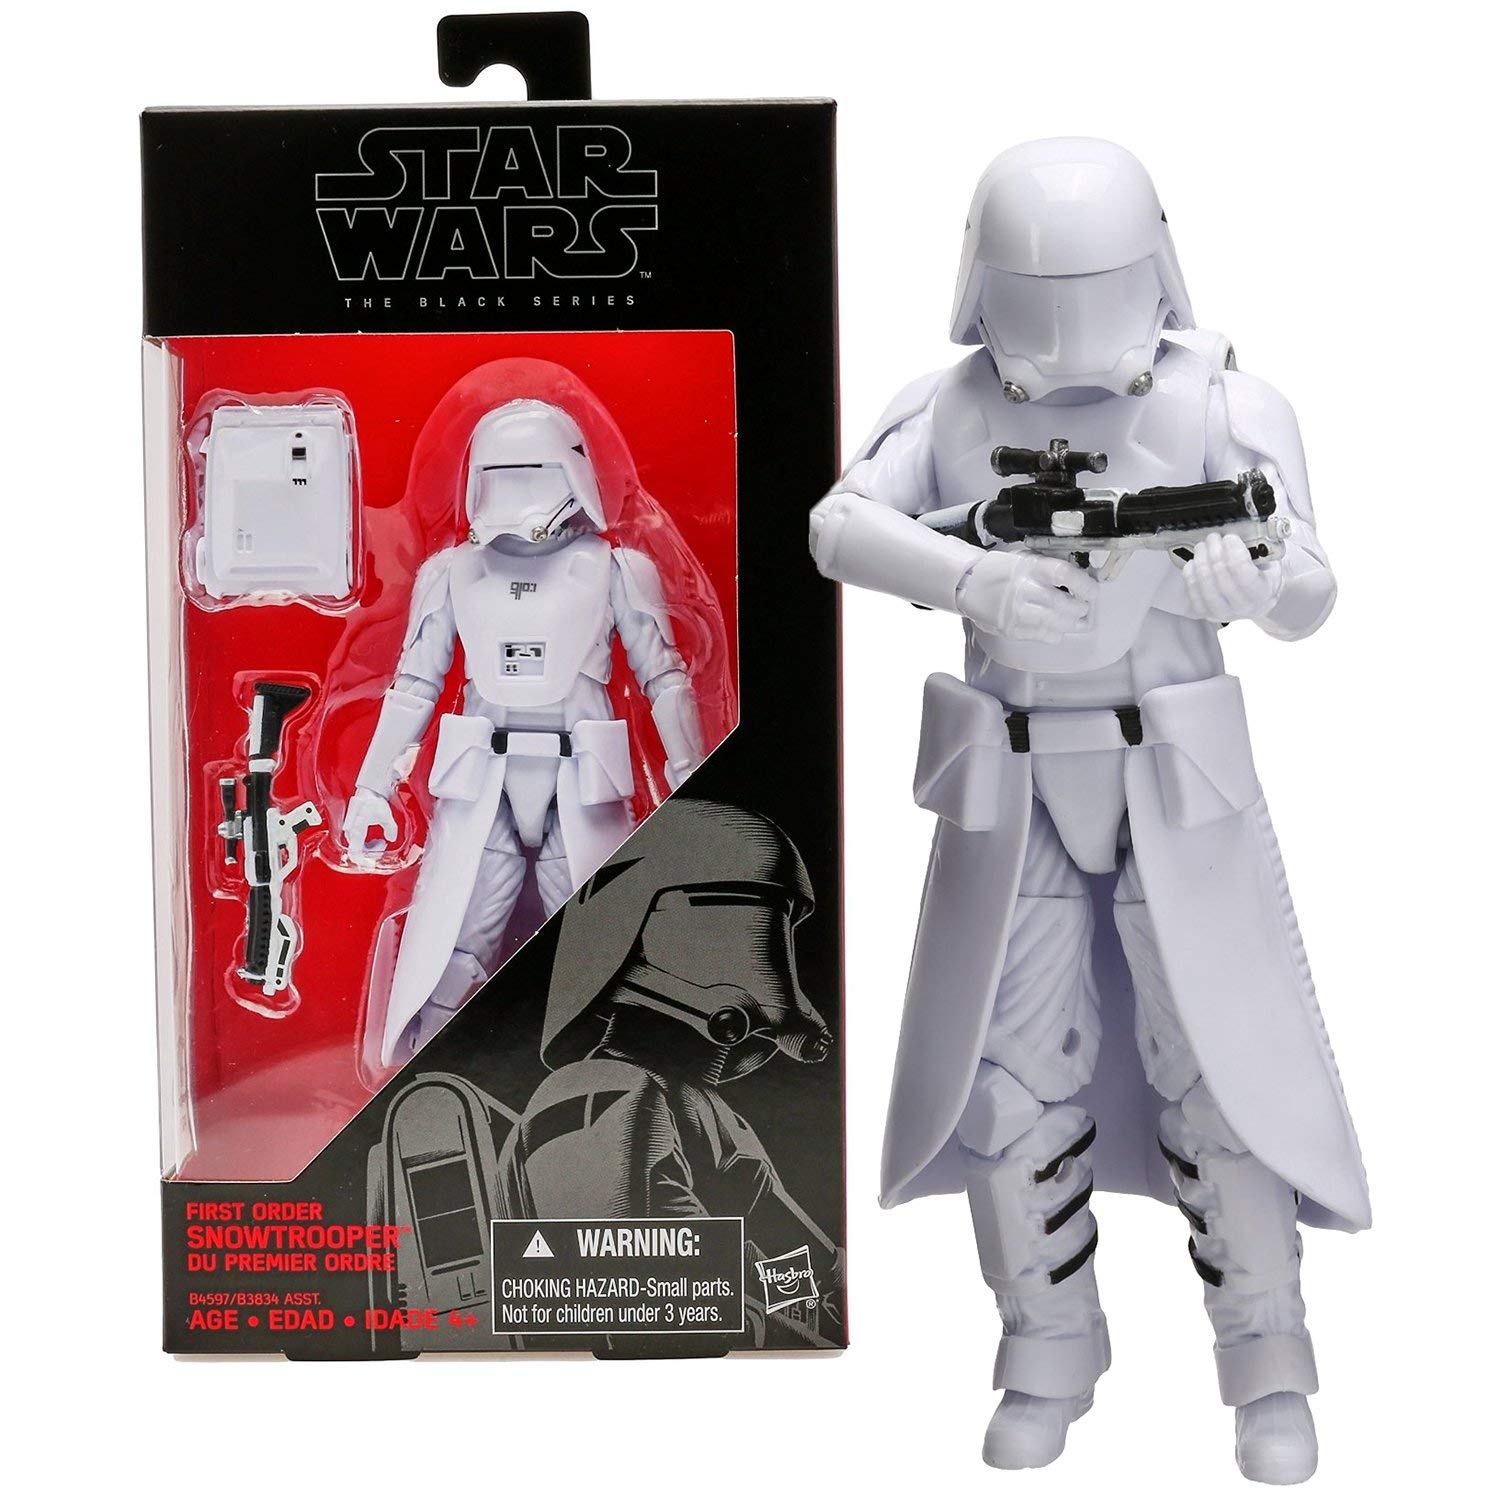 STAR WARS THE BLACK SERIES FIRST ORDER SNOWTROOPER